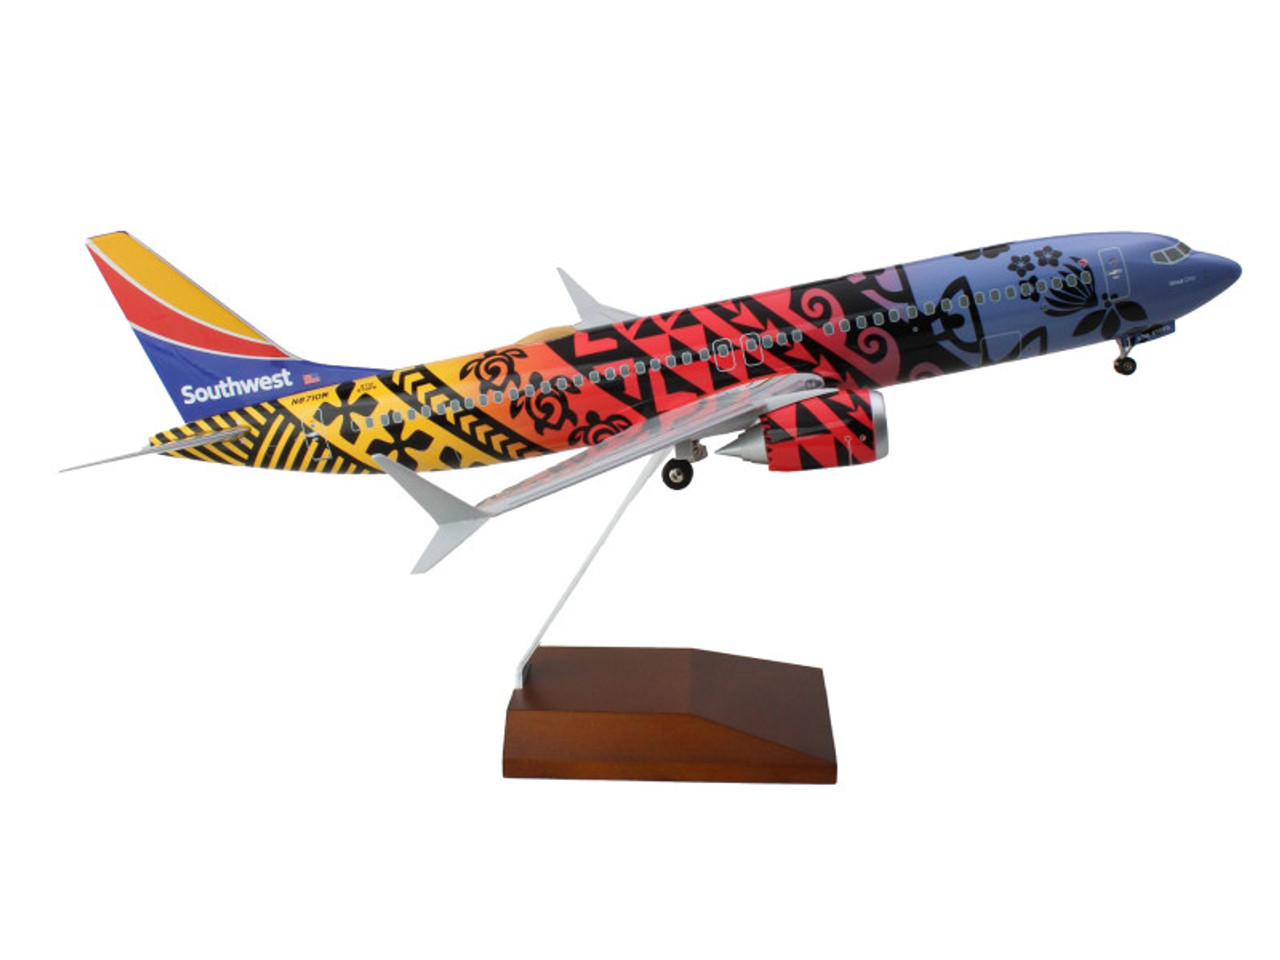 Boeing 737 MAX 8 Commercial Aircraft with Landing Gear "Southwest Airlines - Imua One" (N8710M) Hawaiian Livery (Snap-Fit) 1/100 Plastic Model by Skymarks